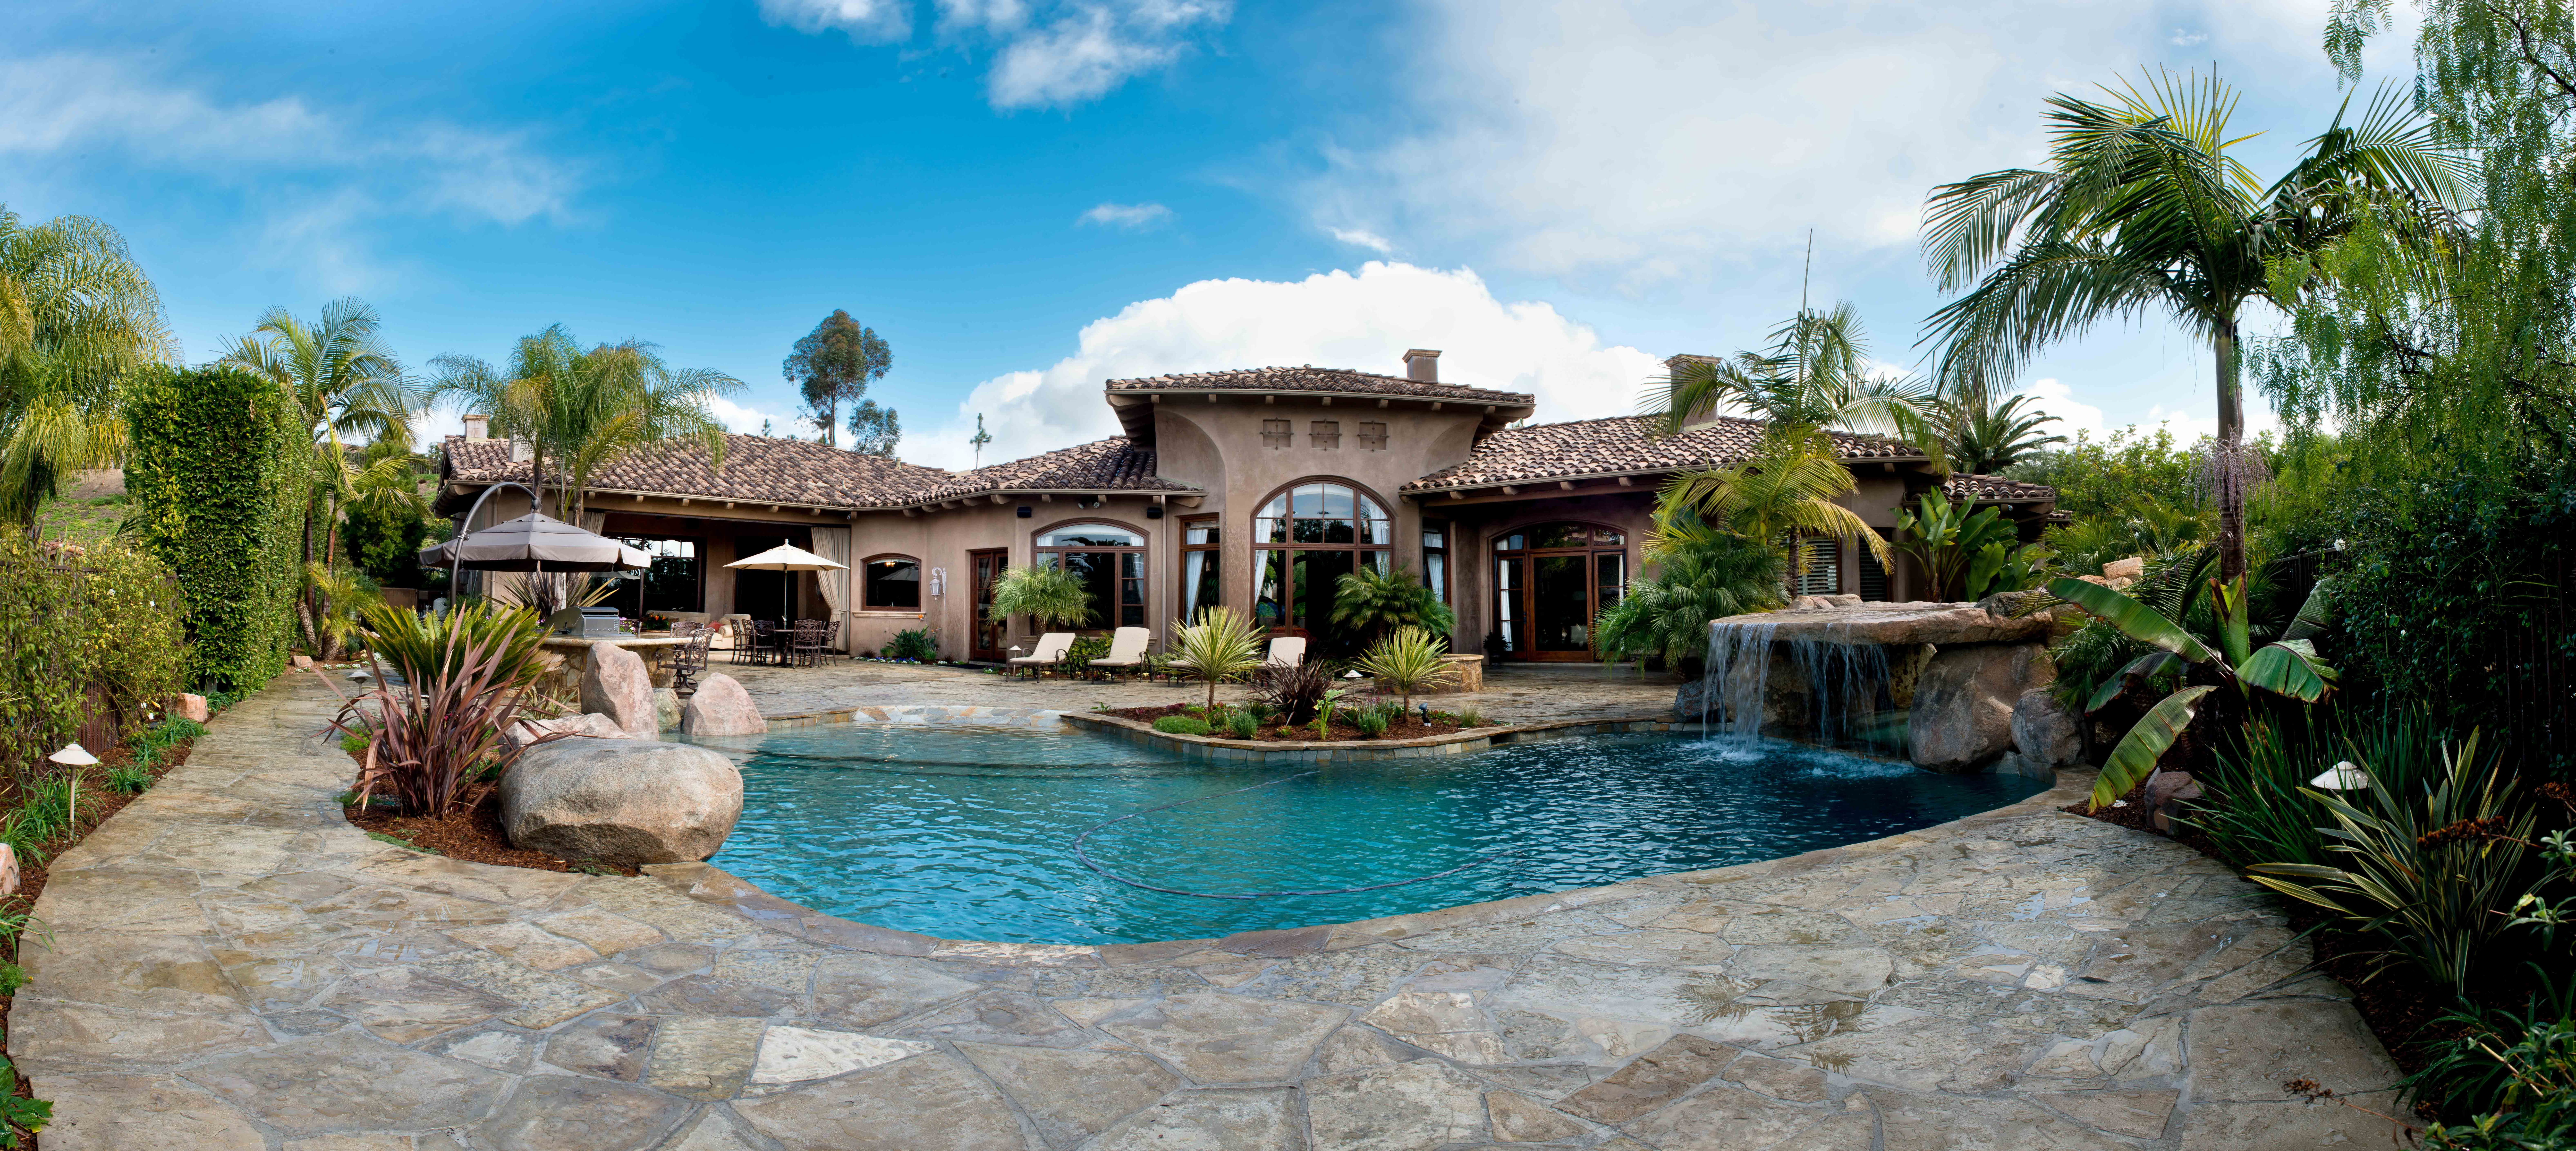 New San Diego Rancho Pacifica and Santa Fe Luxury Homes ... -   Luxury Homes Exterior Ideas